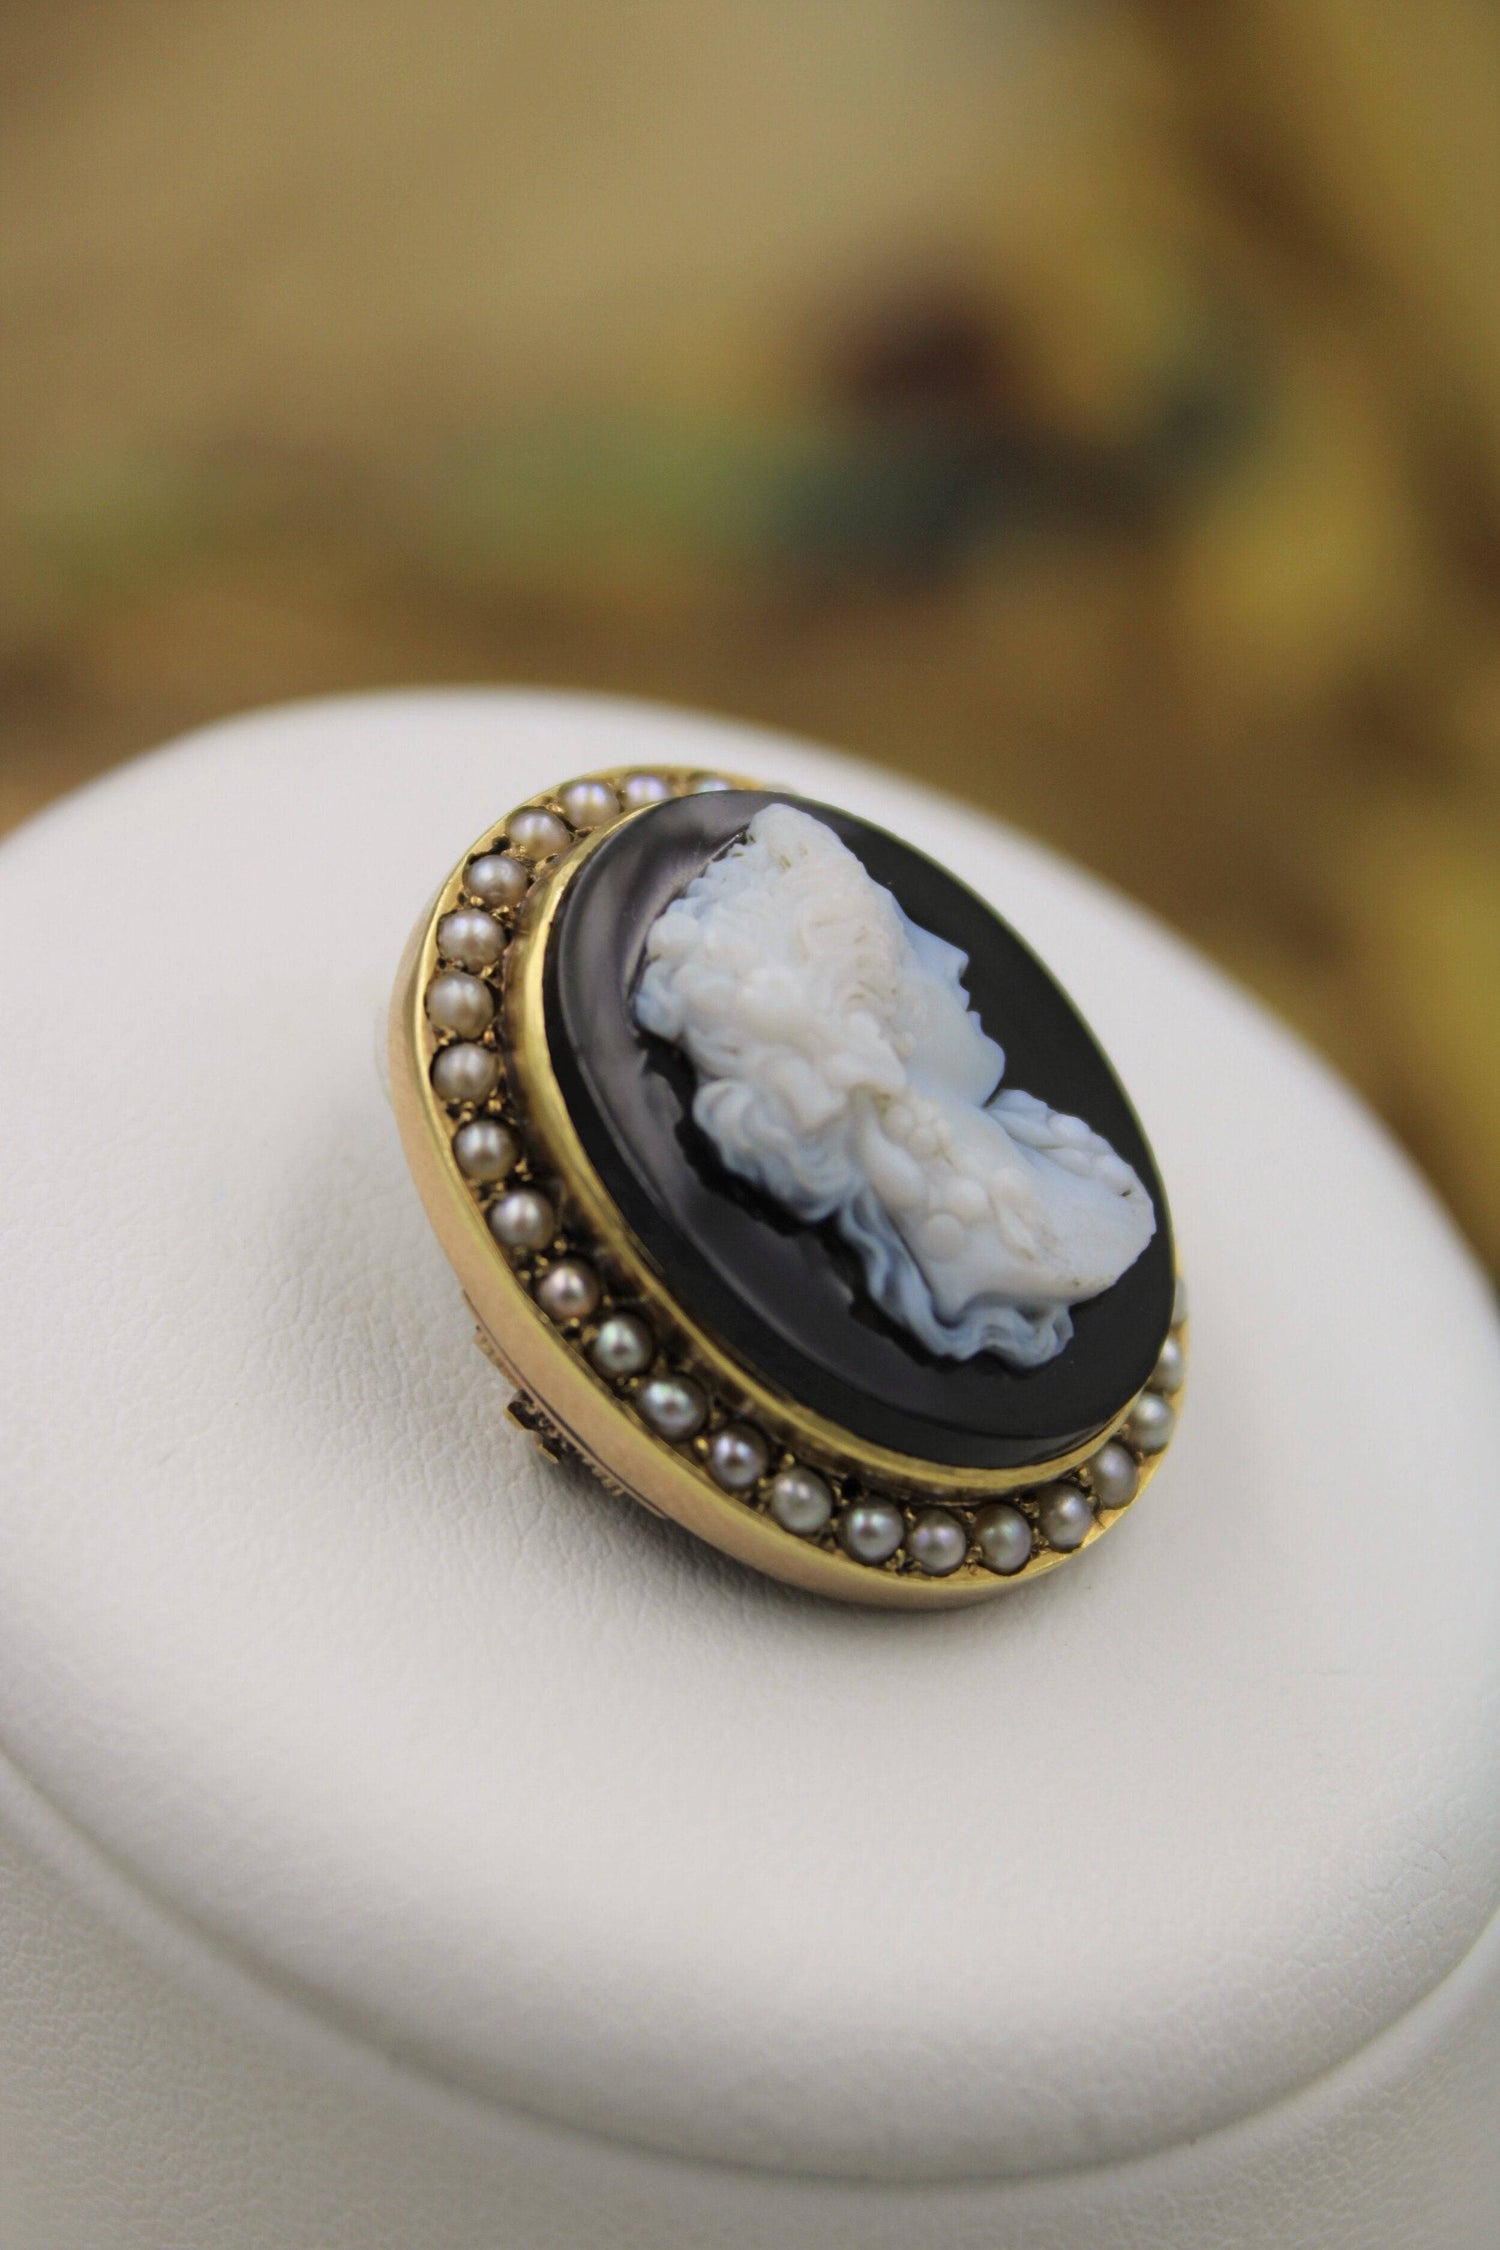 A very fine Hardstone & Natural Pearl Cameo Brooch in 15ct Yellow Gold, Circa 1870-1880 - Robin Haydock Antiques